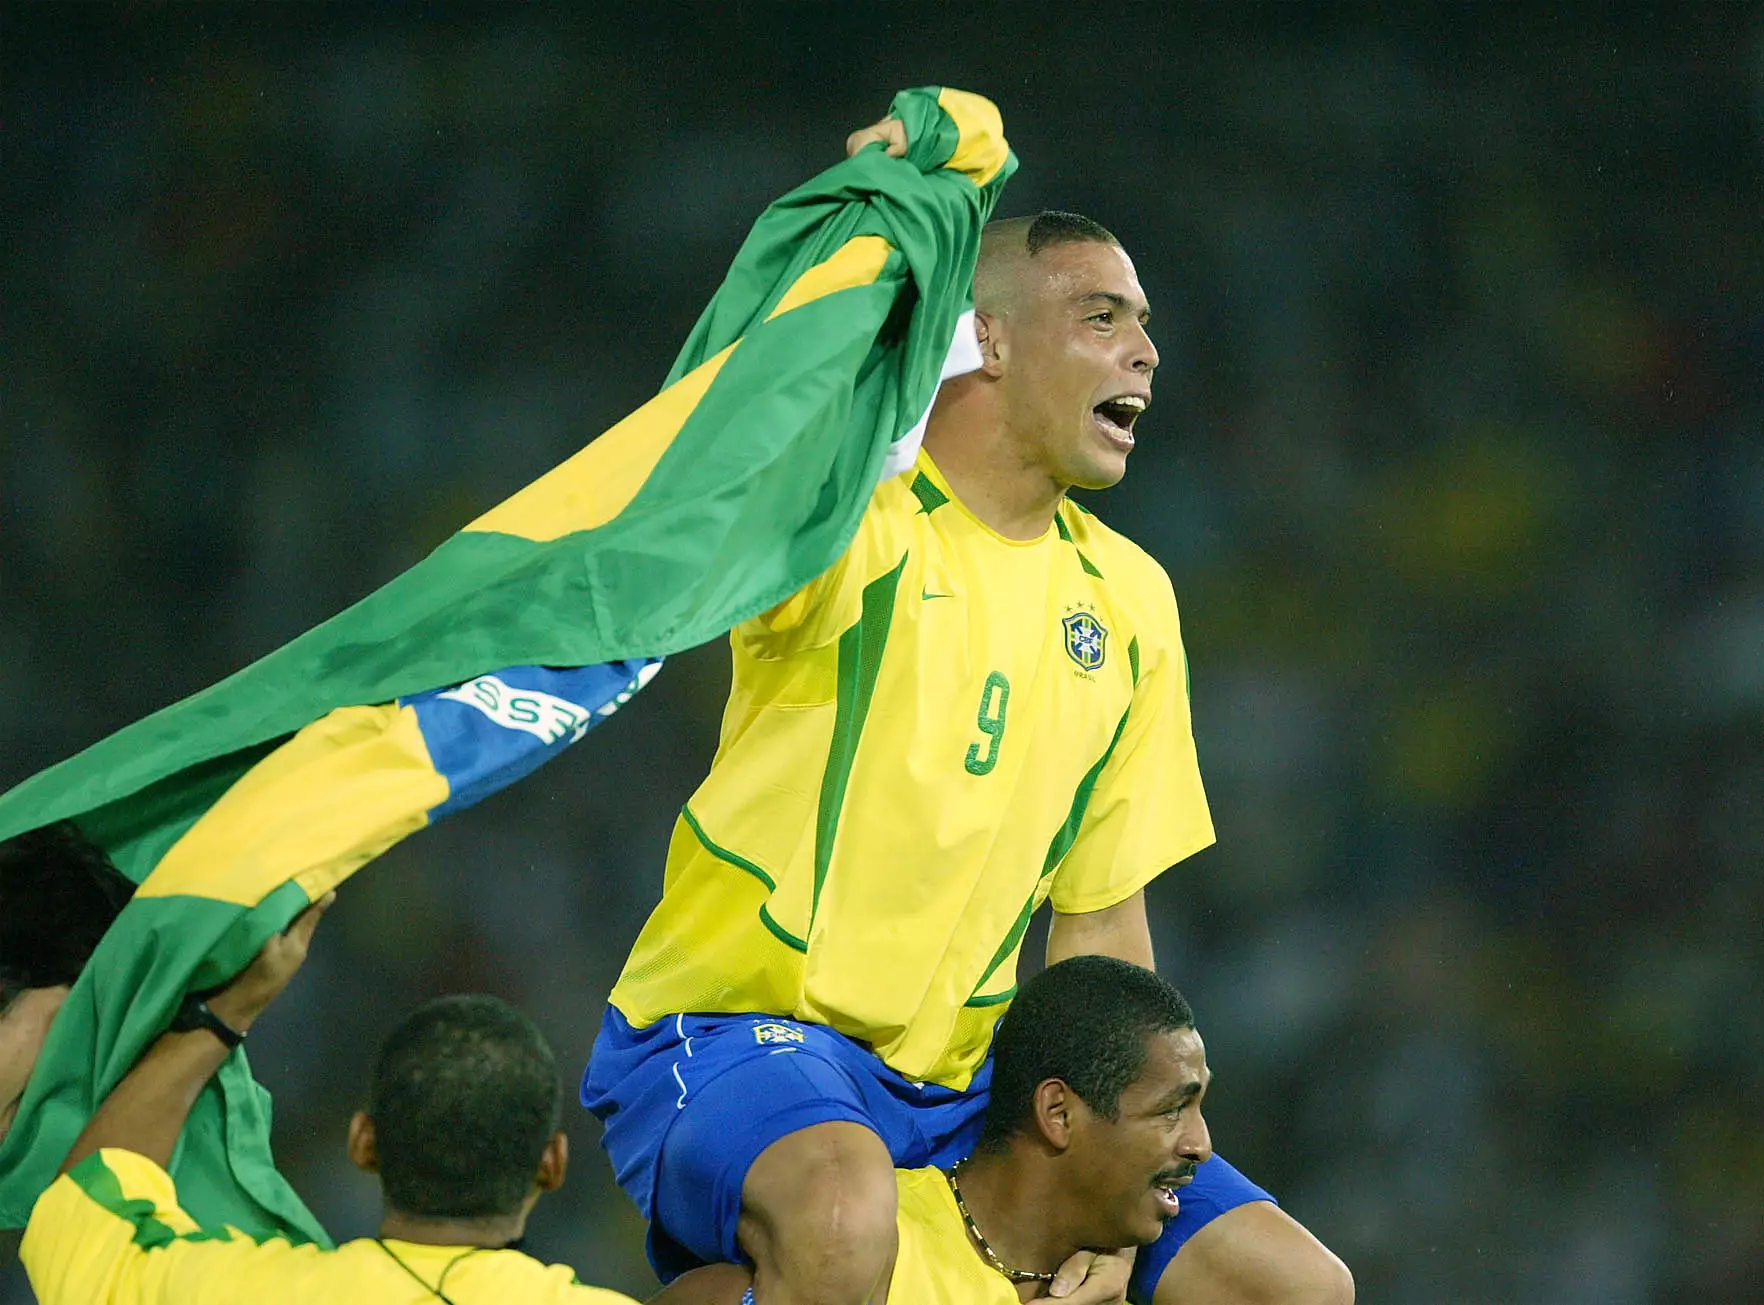 After heartache in 98, Ronaldo was the World Cup winner in 2002. Image: PA Images